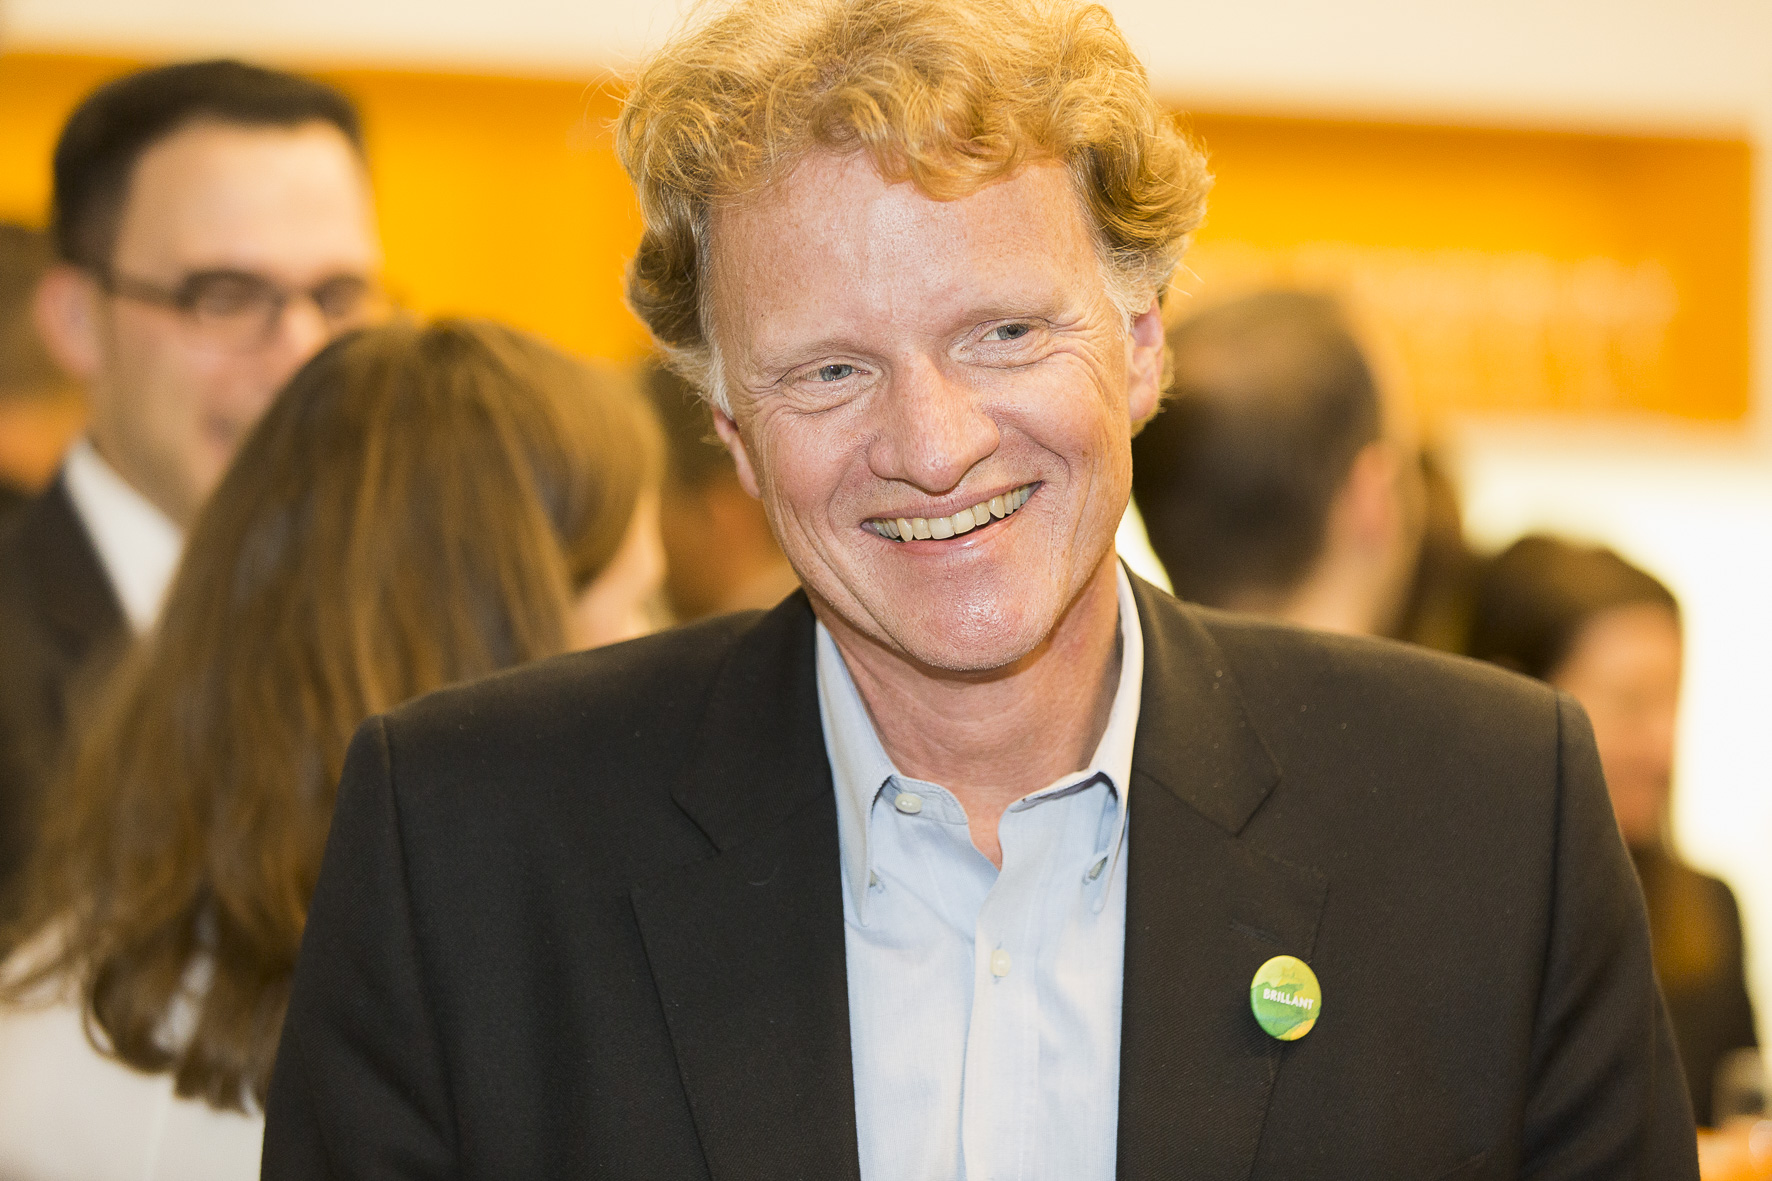 Photo of BSI Life Sciences' Jens Thuesen smiling at a conference